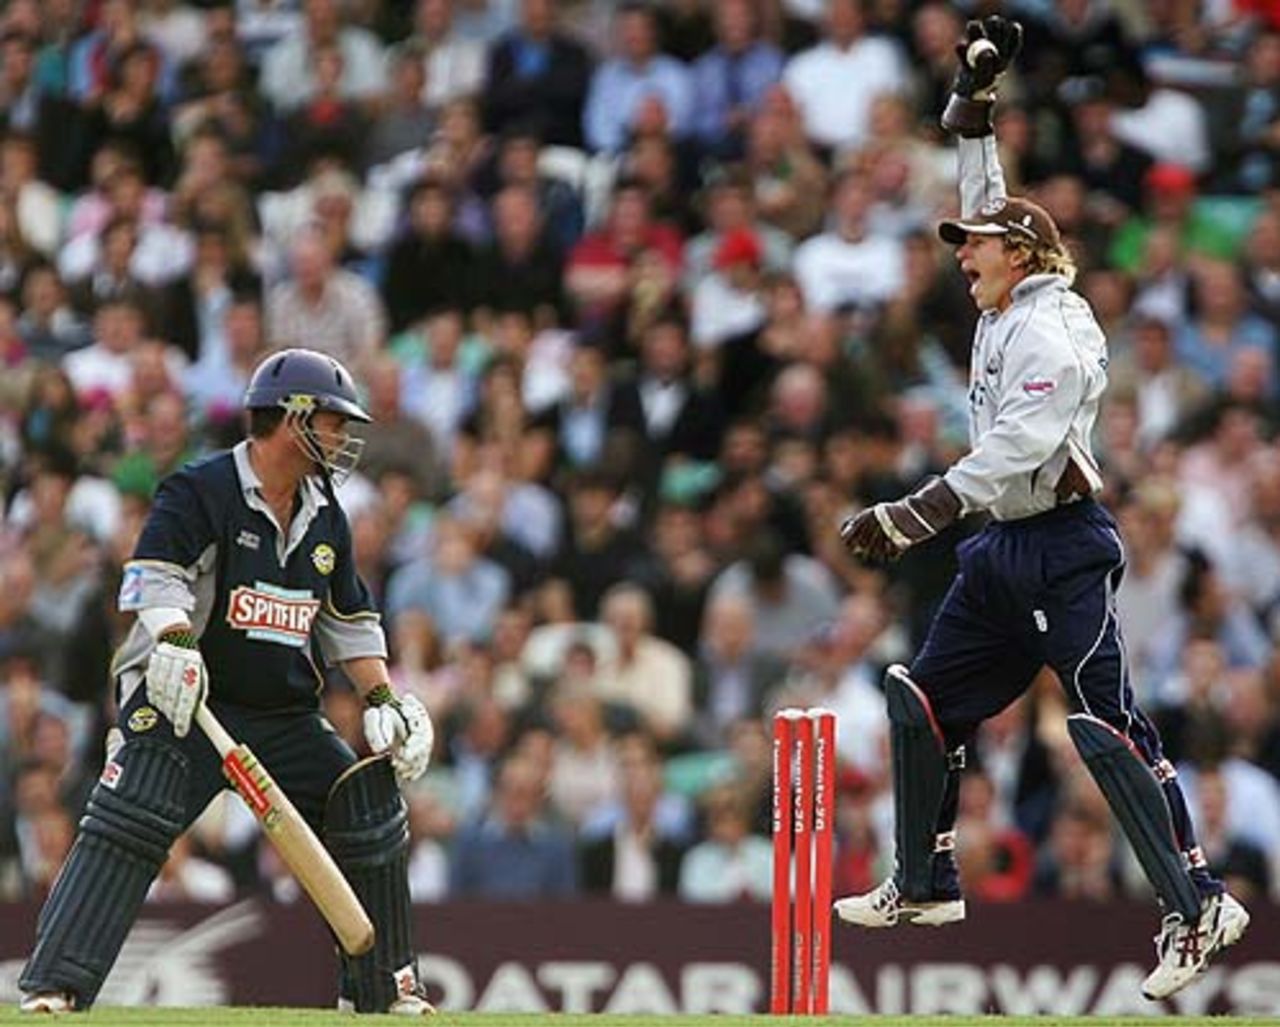 Kent's Matt Walker knows his innings is over after Surrey's wicketkeeper Jonathan Batty completed the catch, The Oval, July 6, 2007